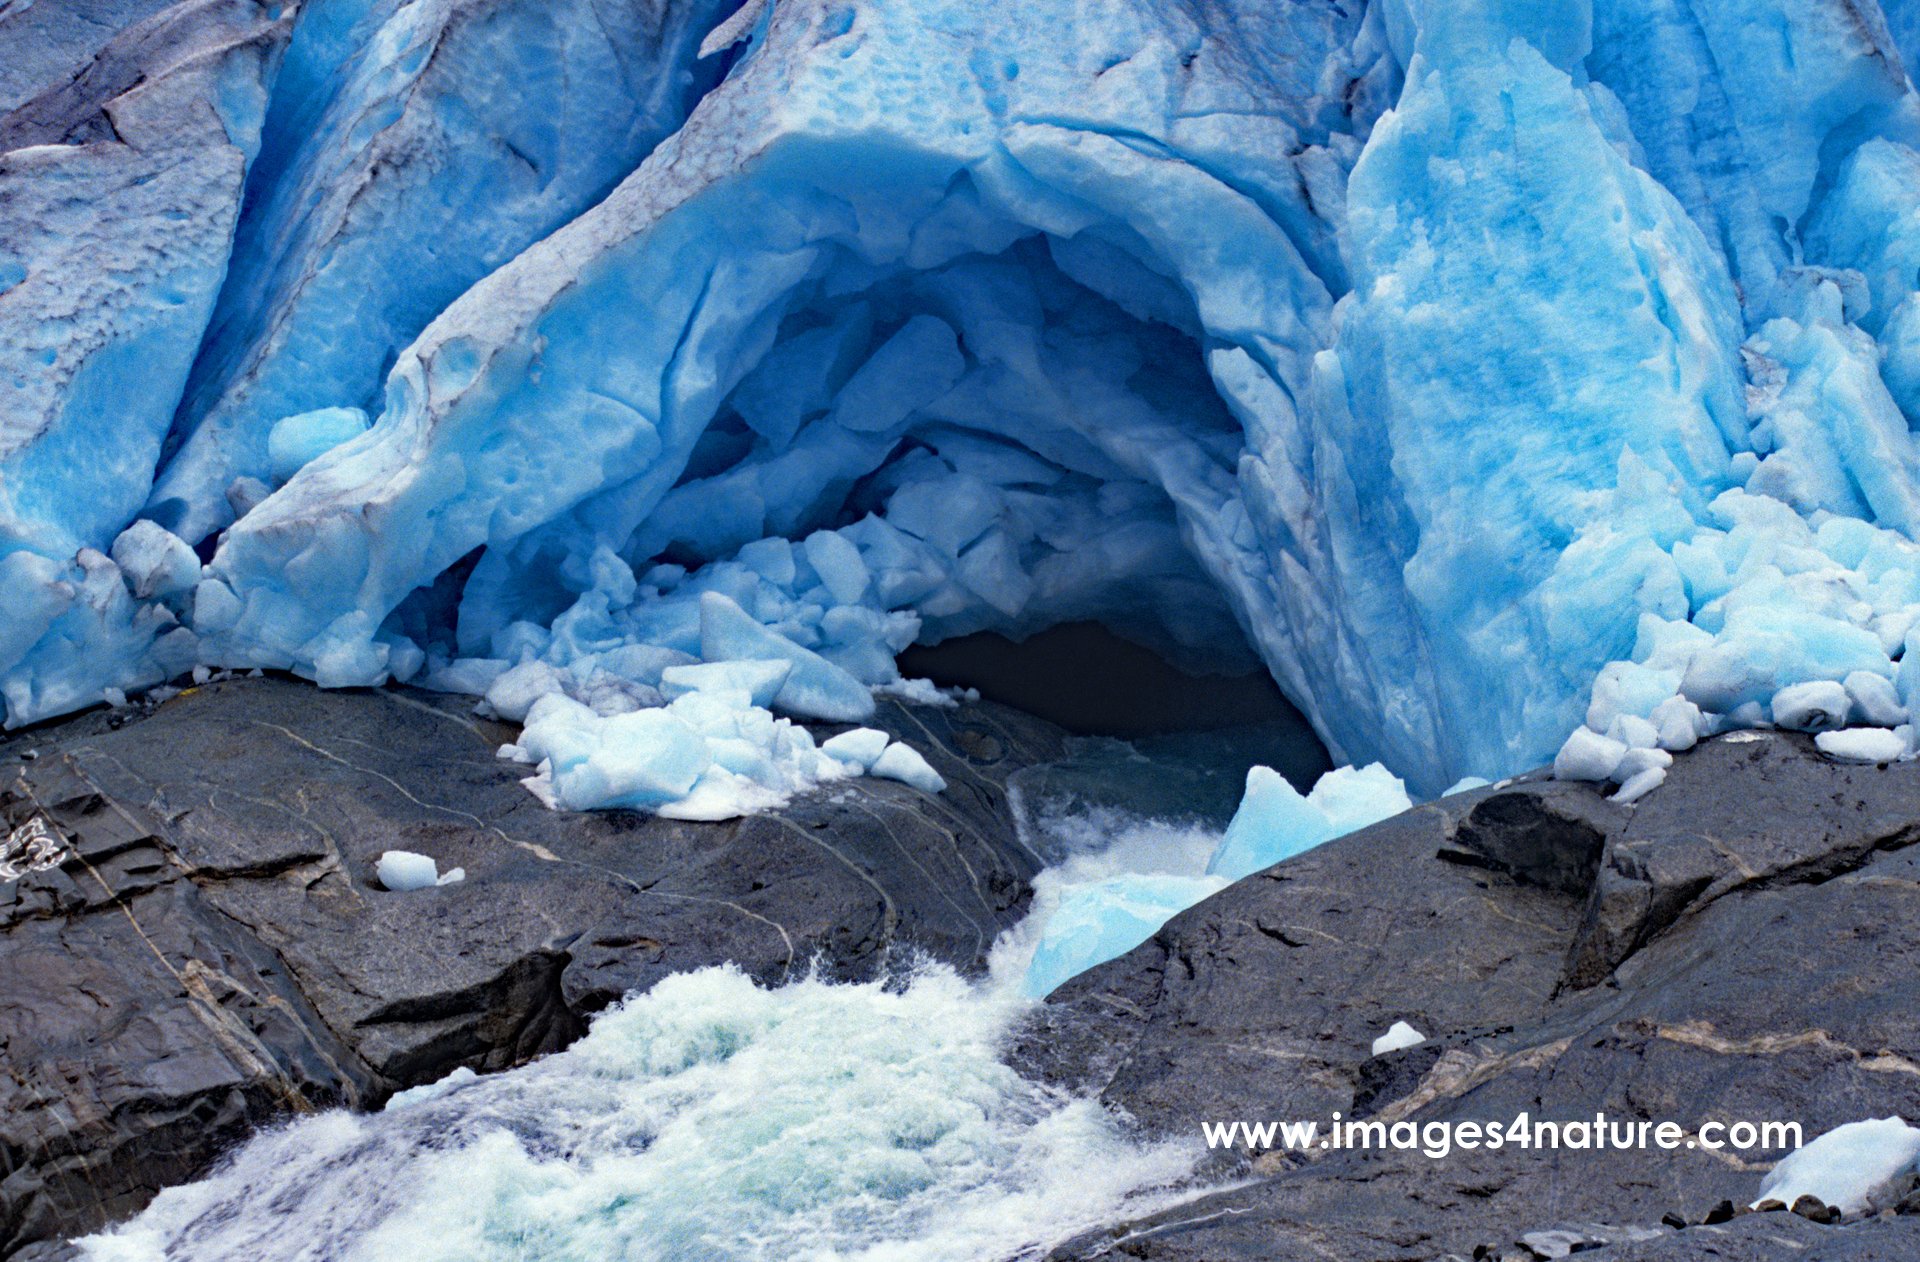 Stream emerging from bluish glacier ice on rock surface